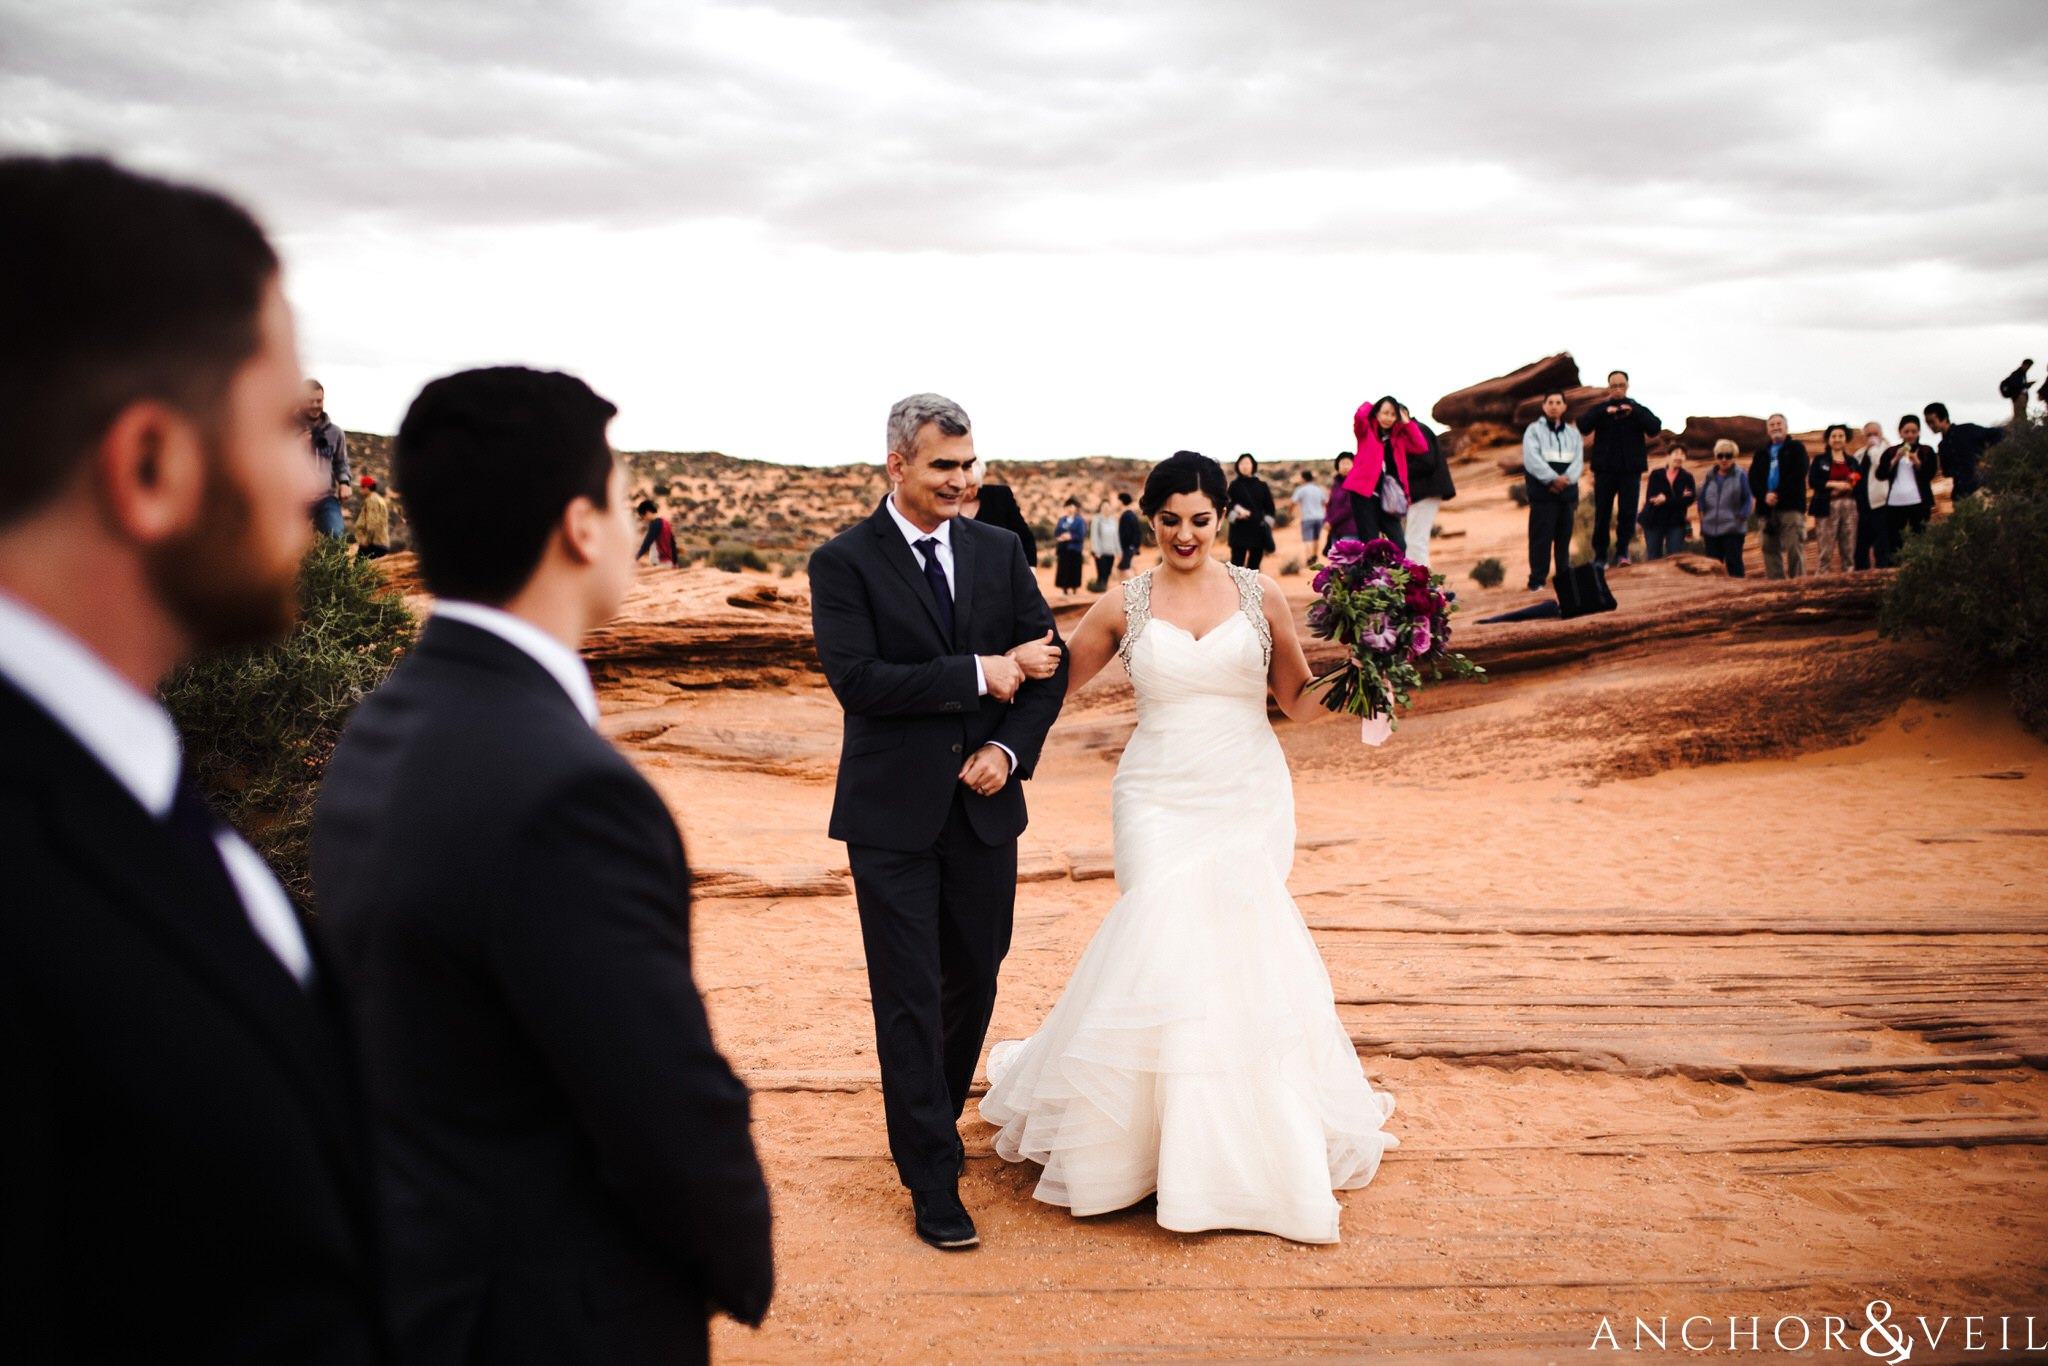 dad walking her down the aisle during their Horseshoe Bend Elopement Wedding